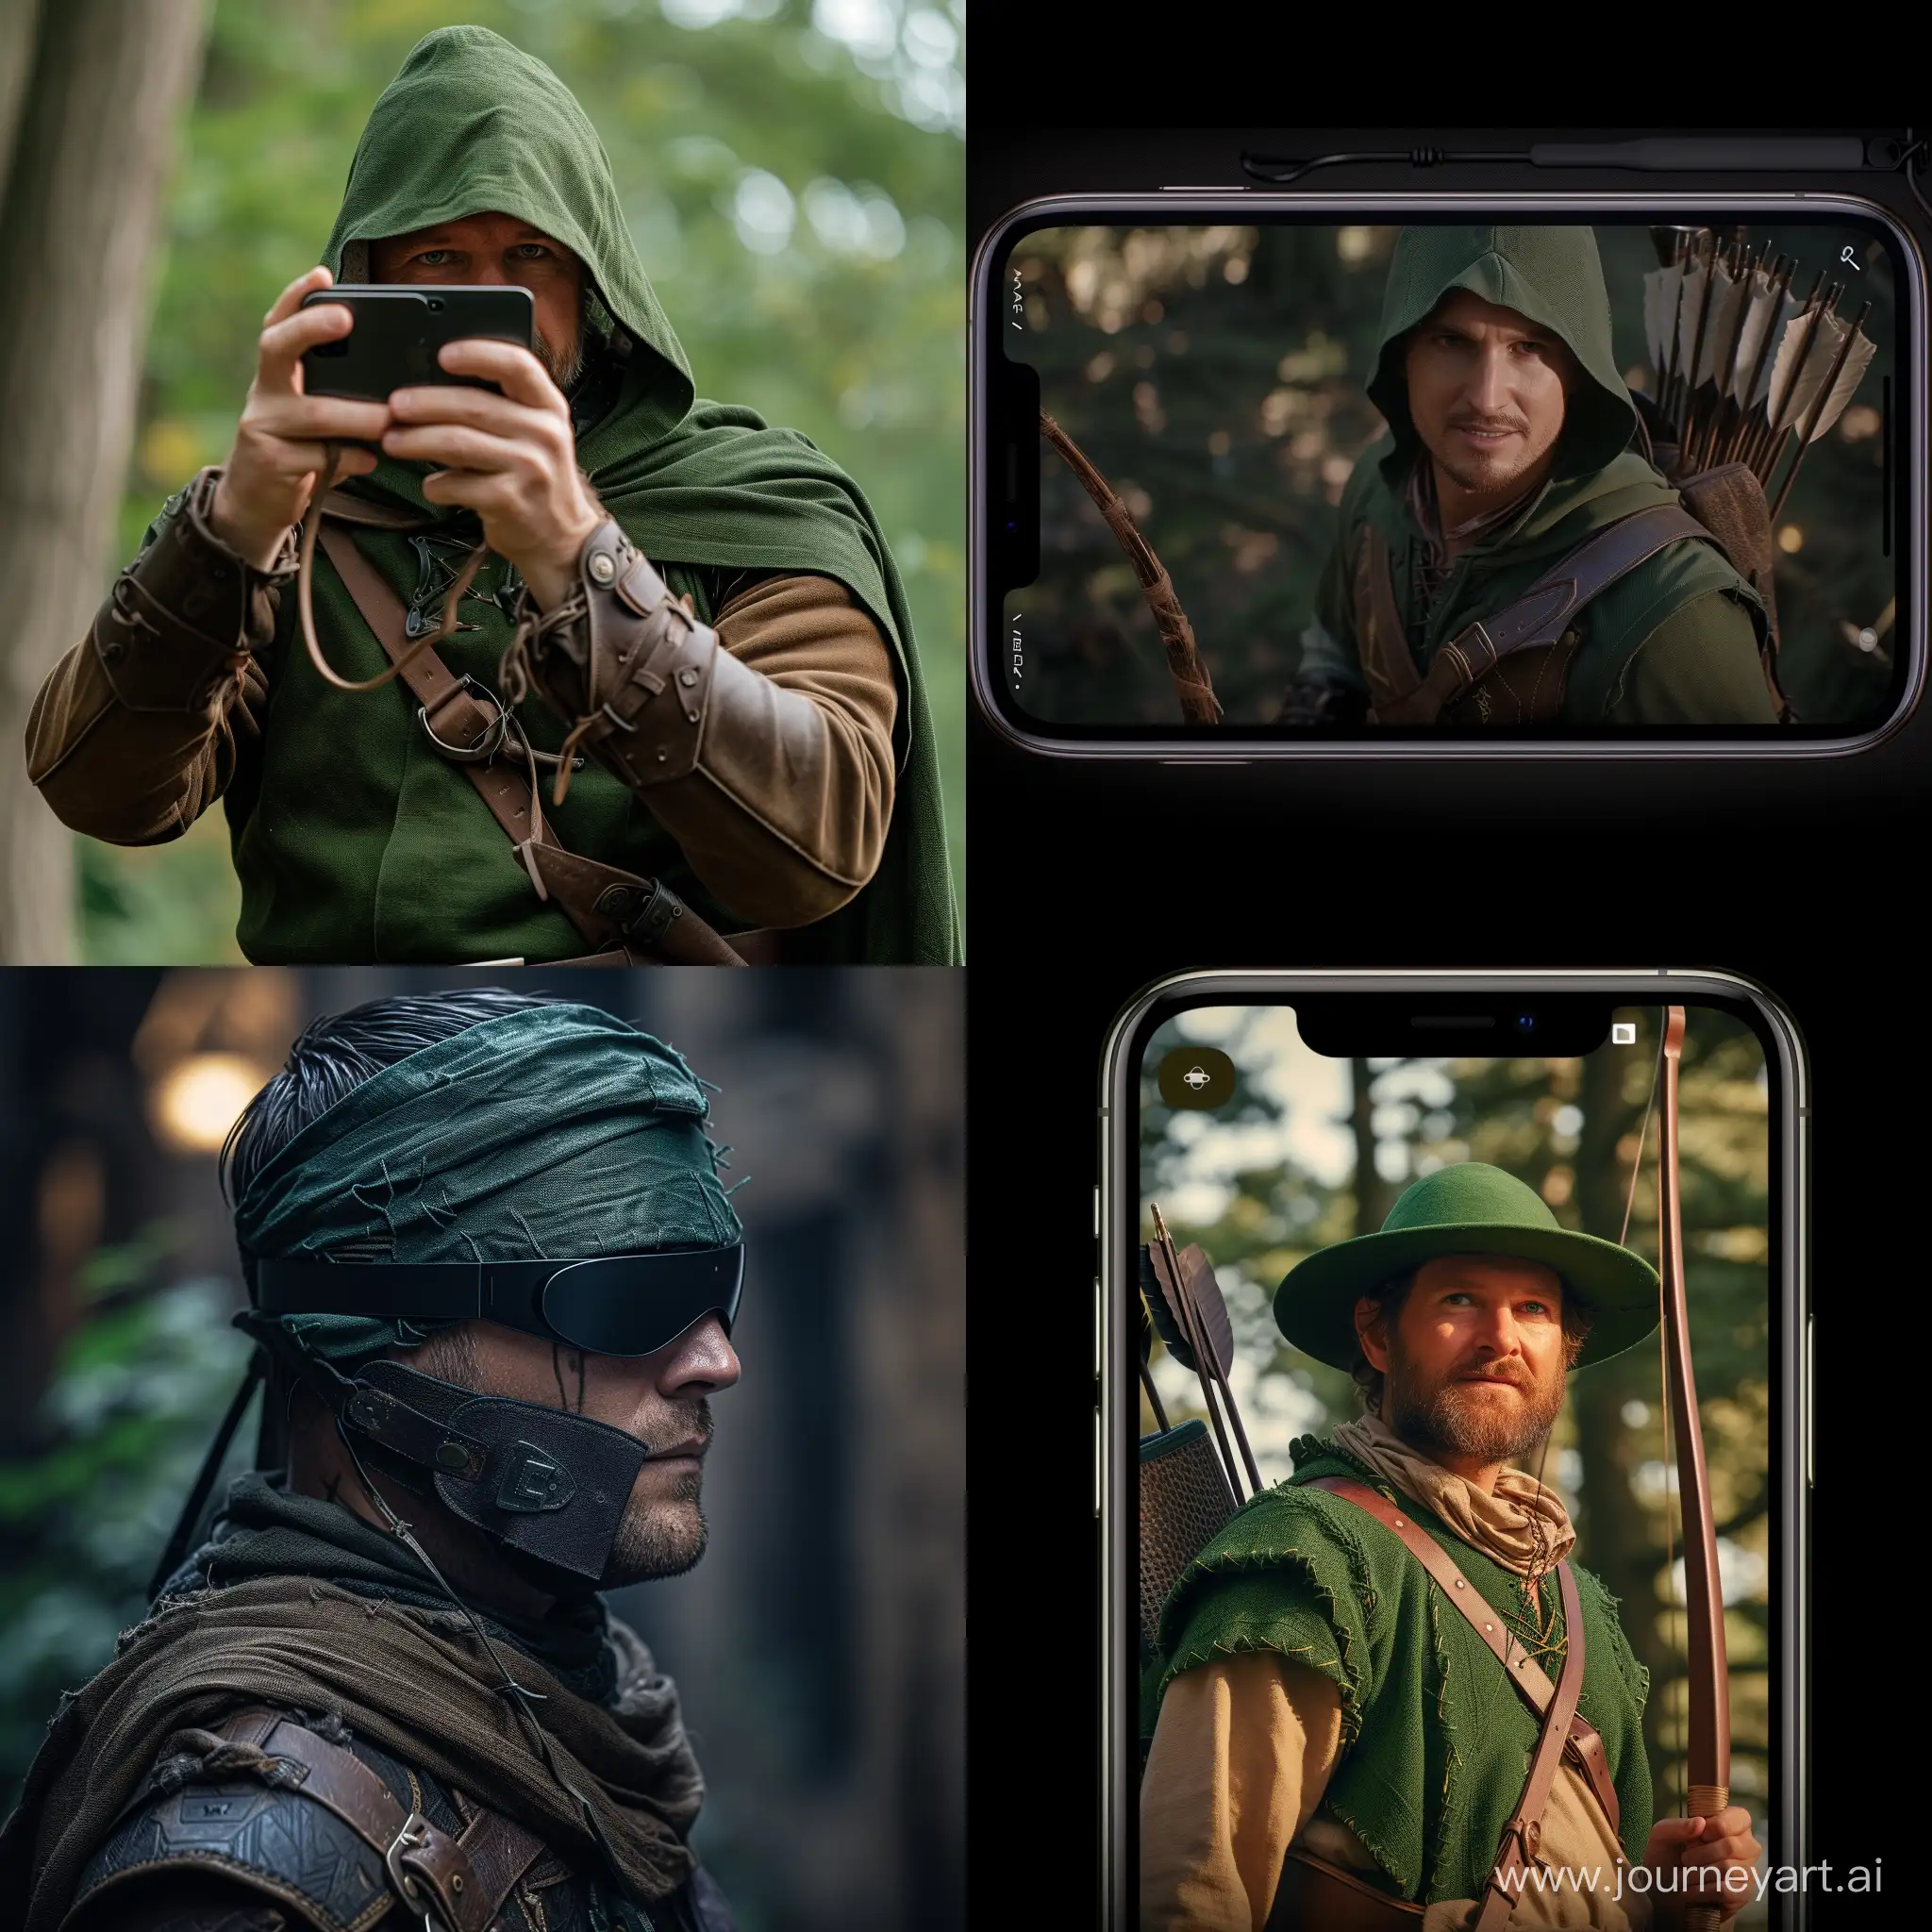 Robin-Hood-Archer-with-the-Latest-Apple-Vision-Pro-Camera